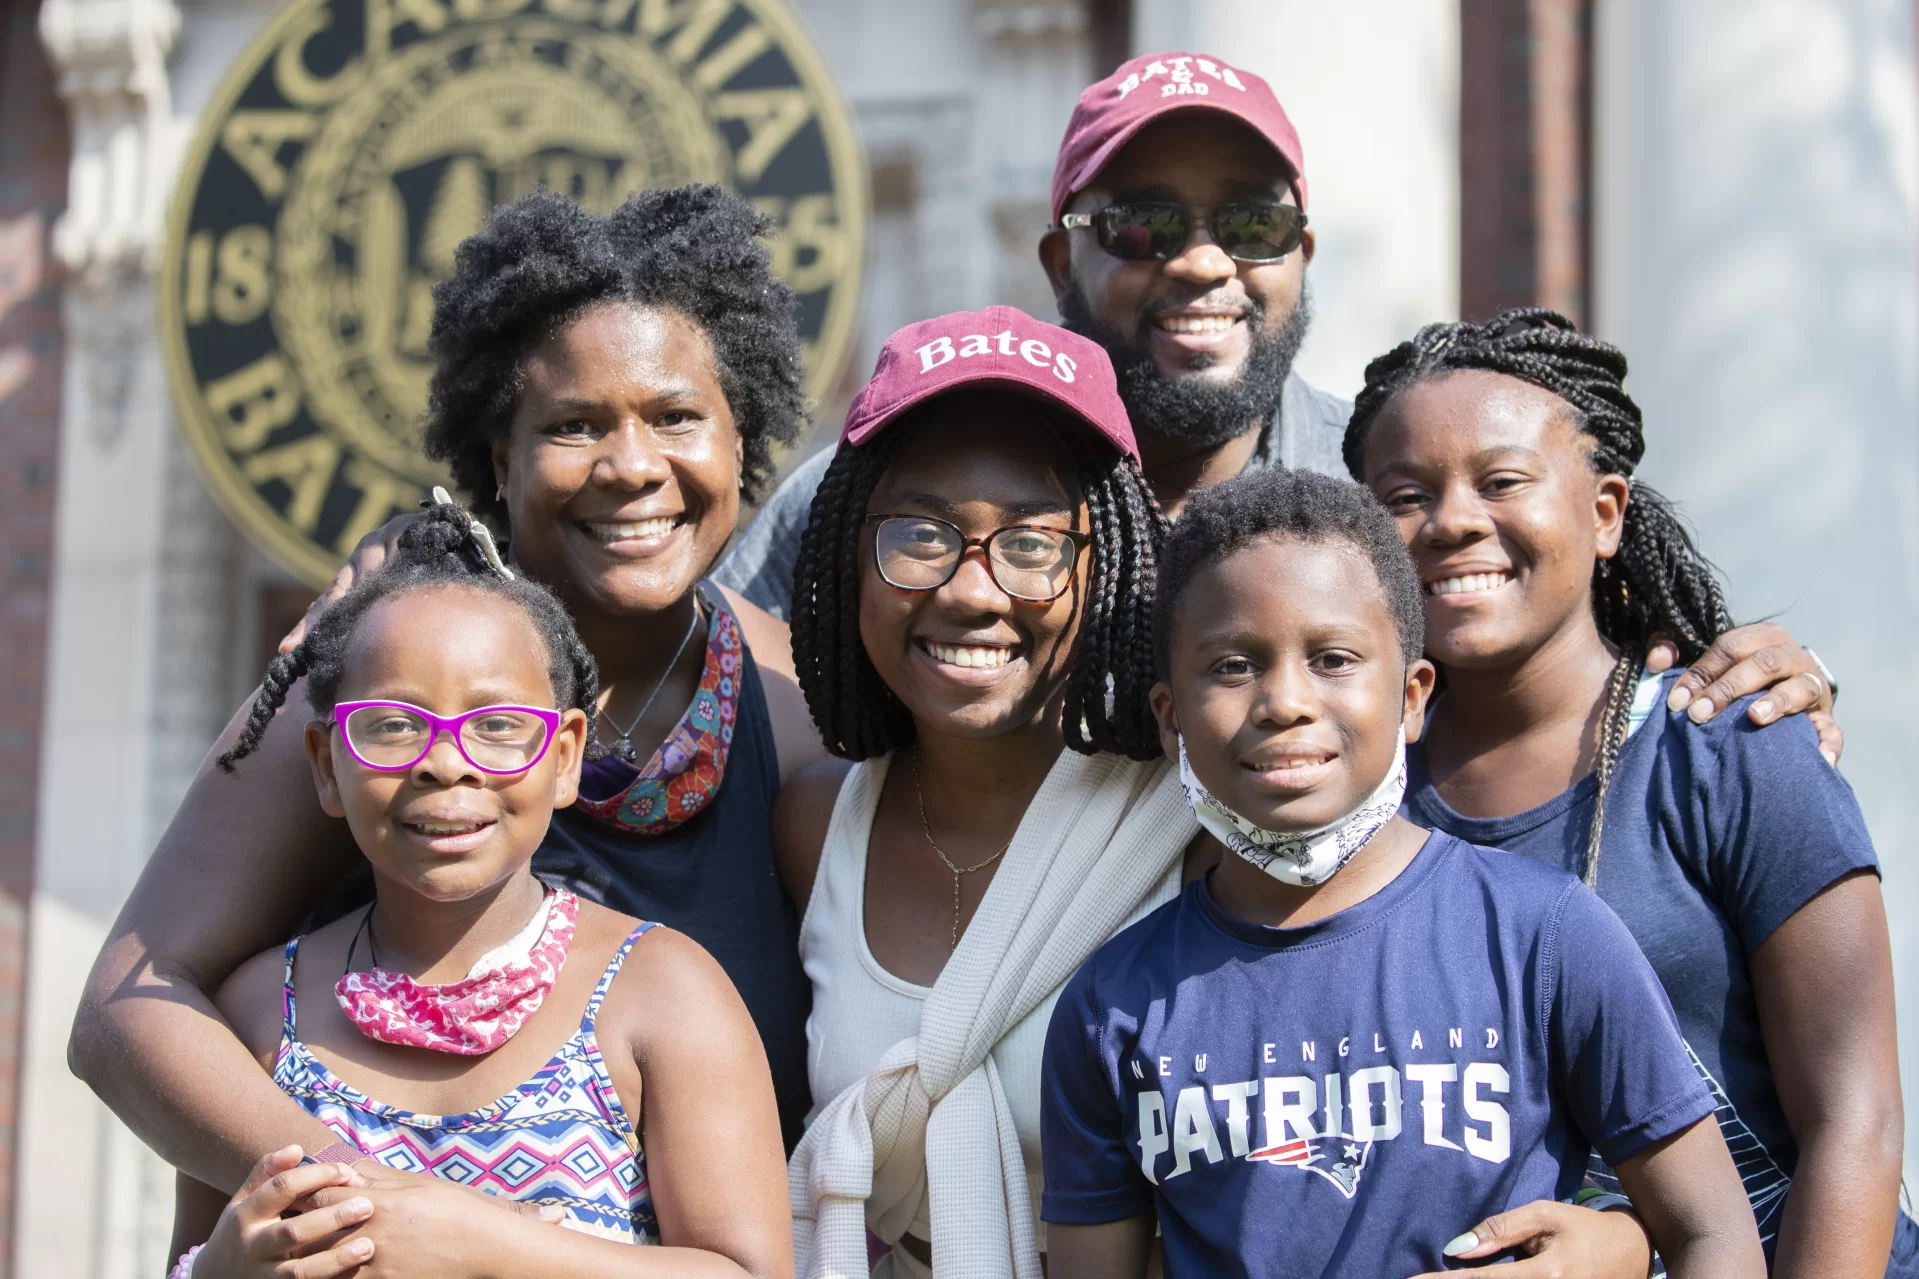 Eden Coleman ’25 of Newton Center, Mass., poses for a photograph with her family at the conclusion of President Spencer’s welcome address in front of Coram Library.  From left: sister Hammond, mother Catrice, Eden, father Kelvin, brother Gideon, and sister Farrah.